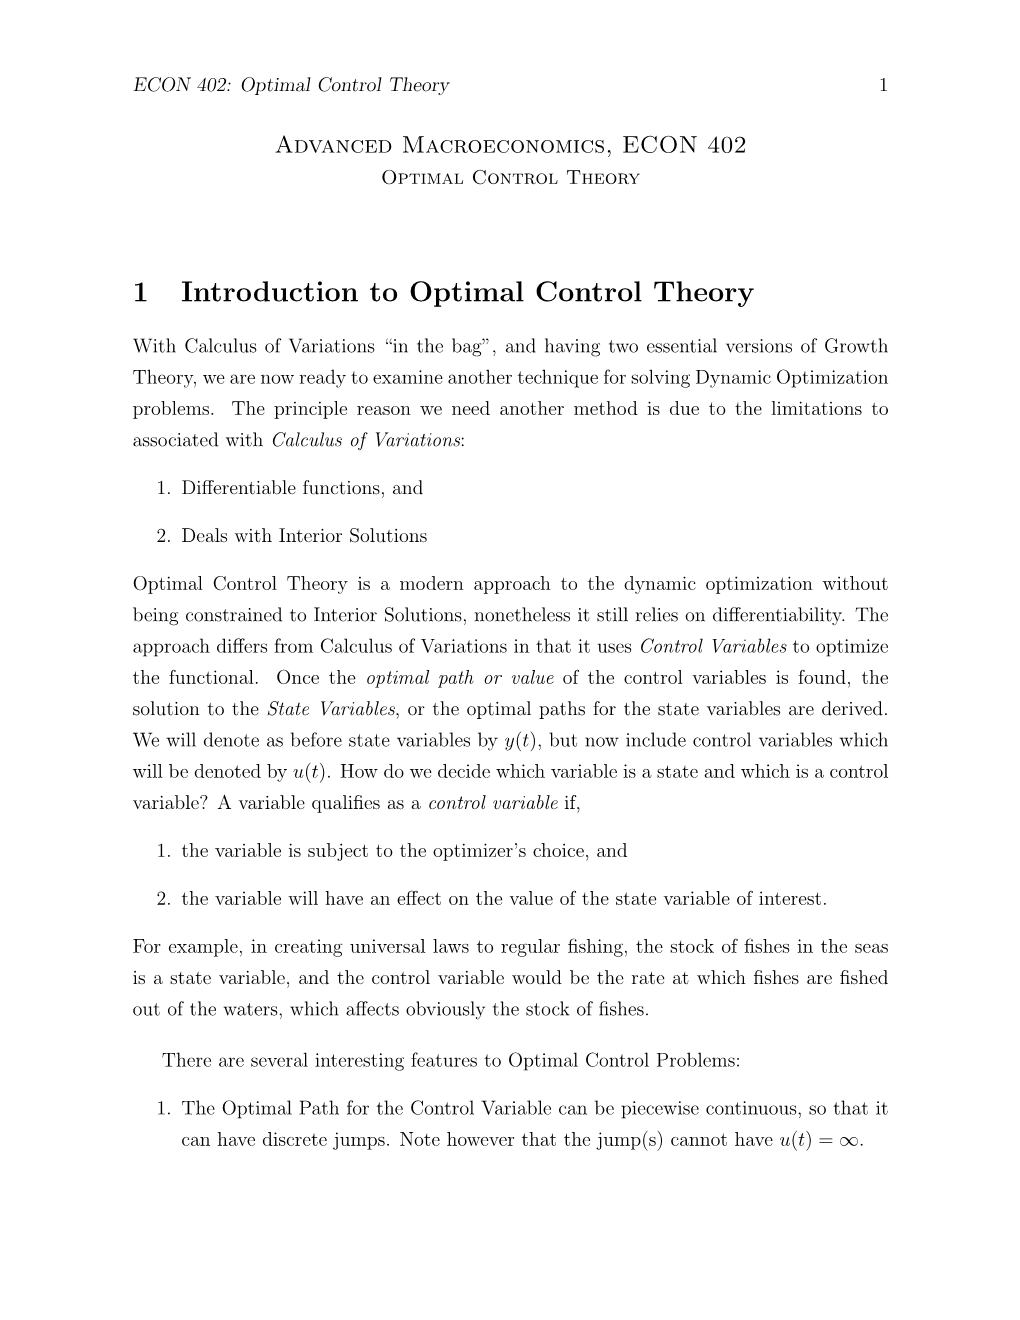 1 Introduction to Optimal Control Theory